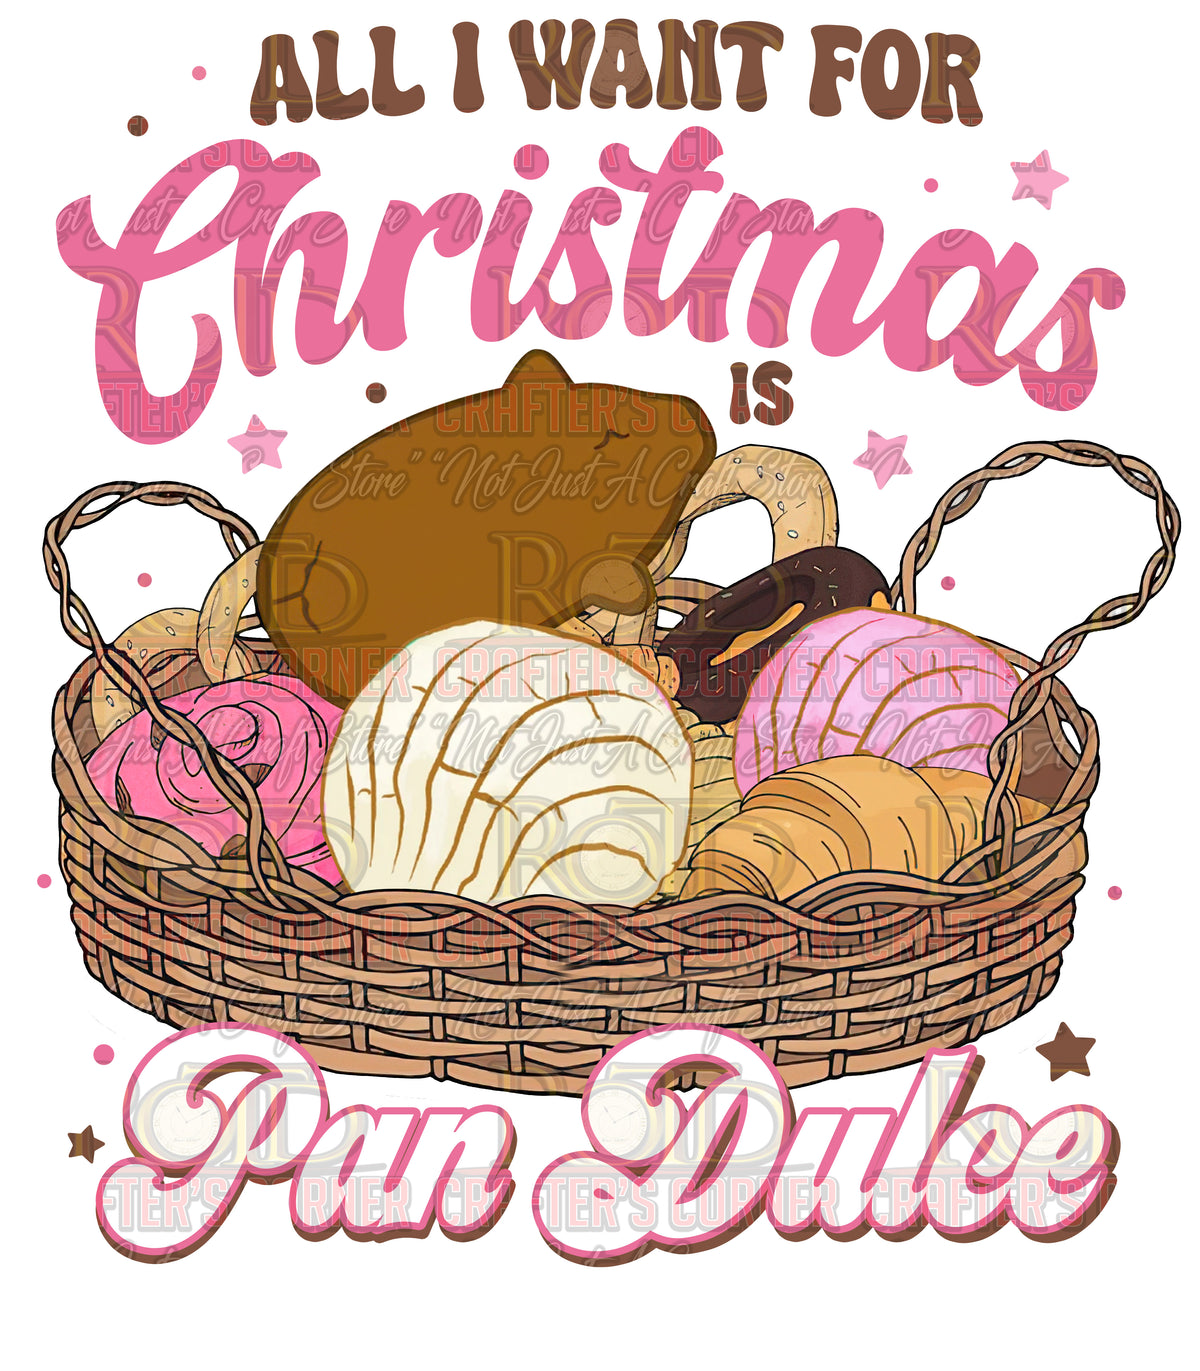 All I Want for Christmas is Pan Dulce